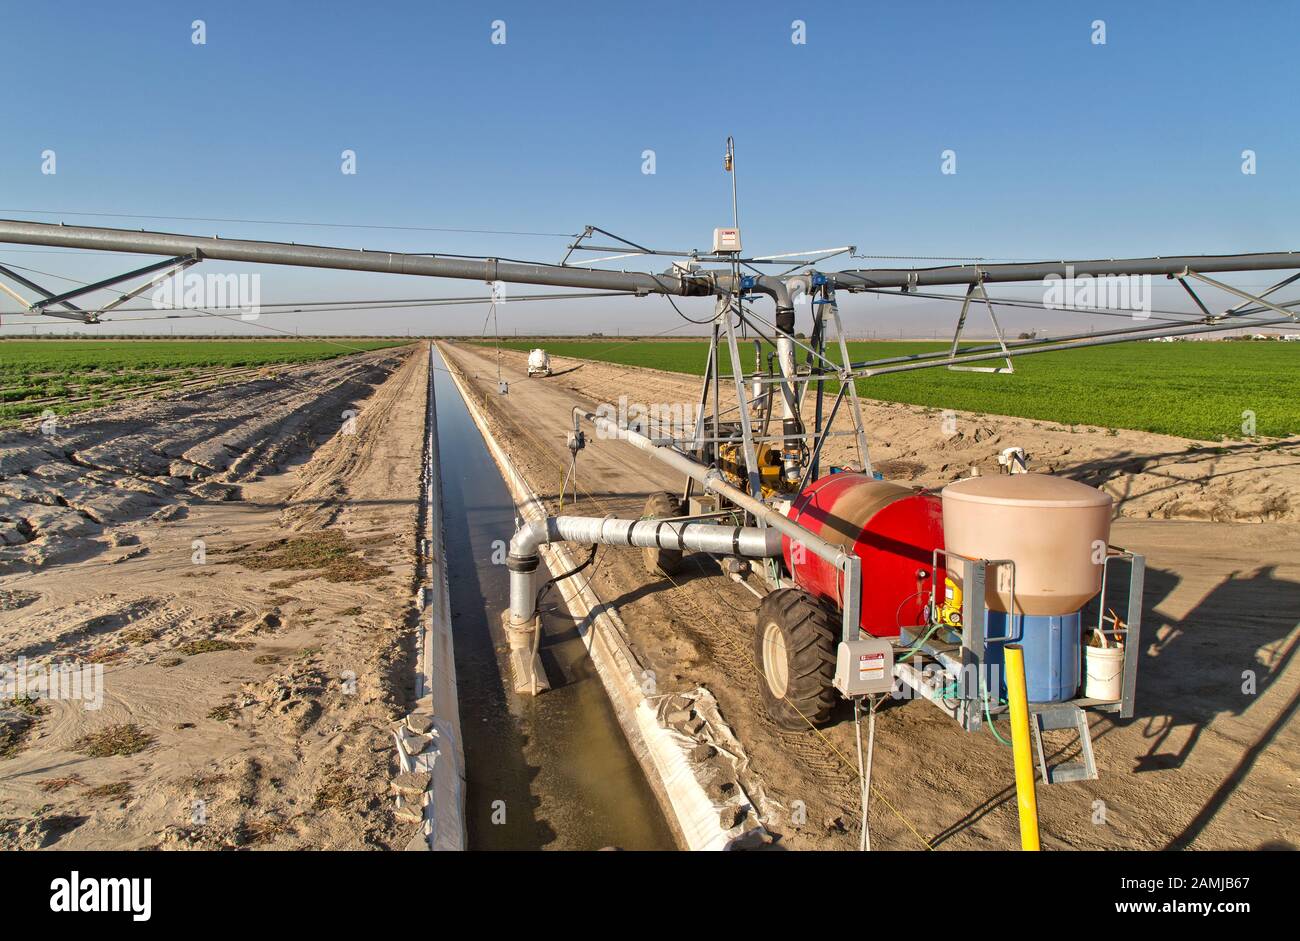 Self Propelled Linear Irrigation System operating, maturing carrot & potato fields. Stock Photo